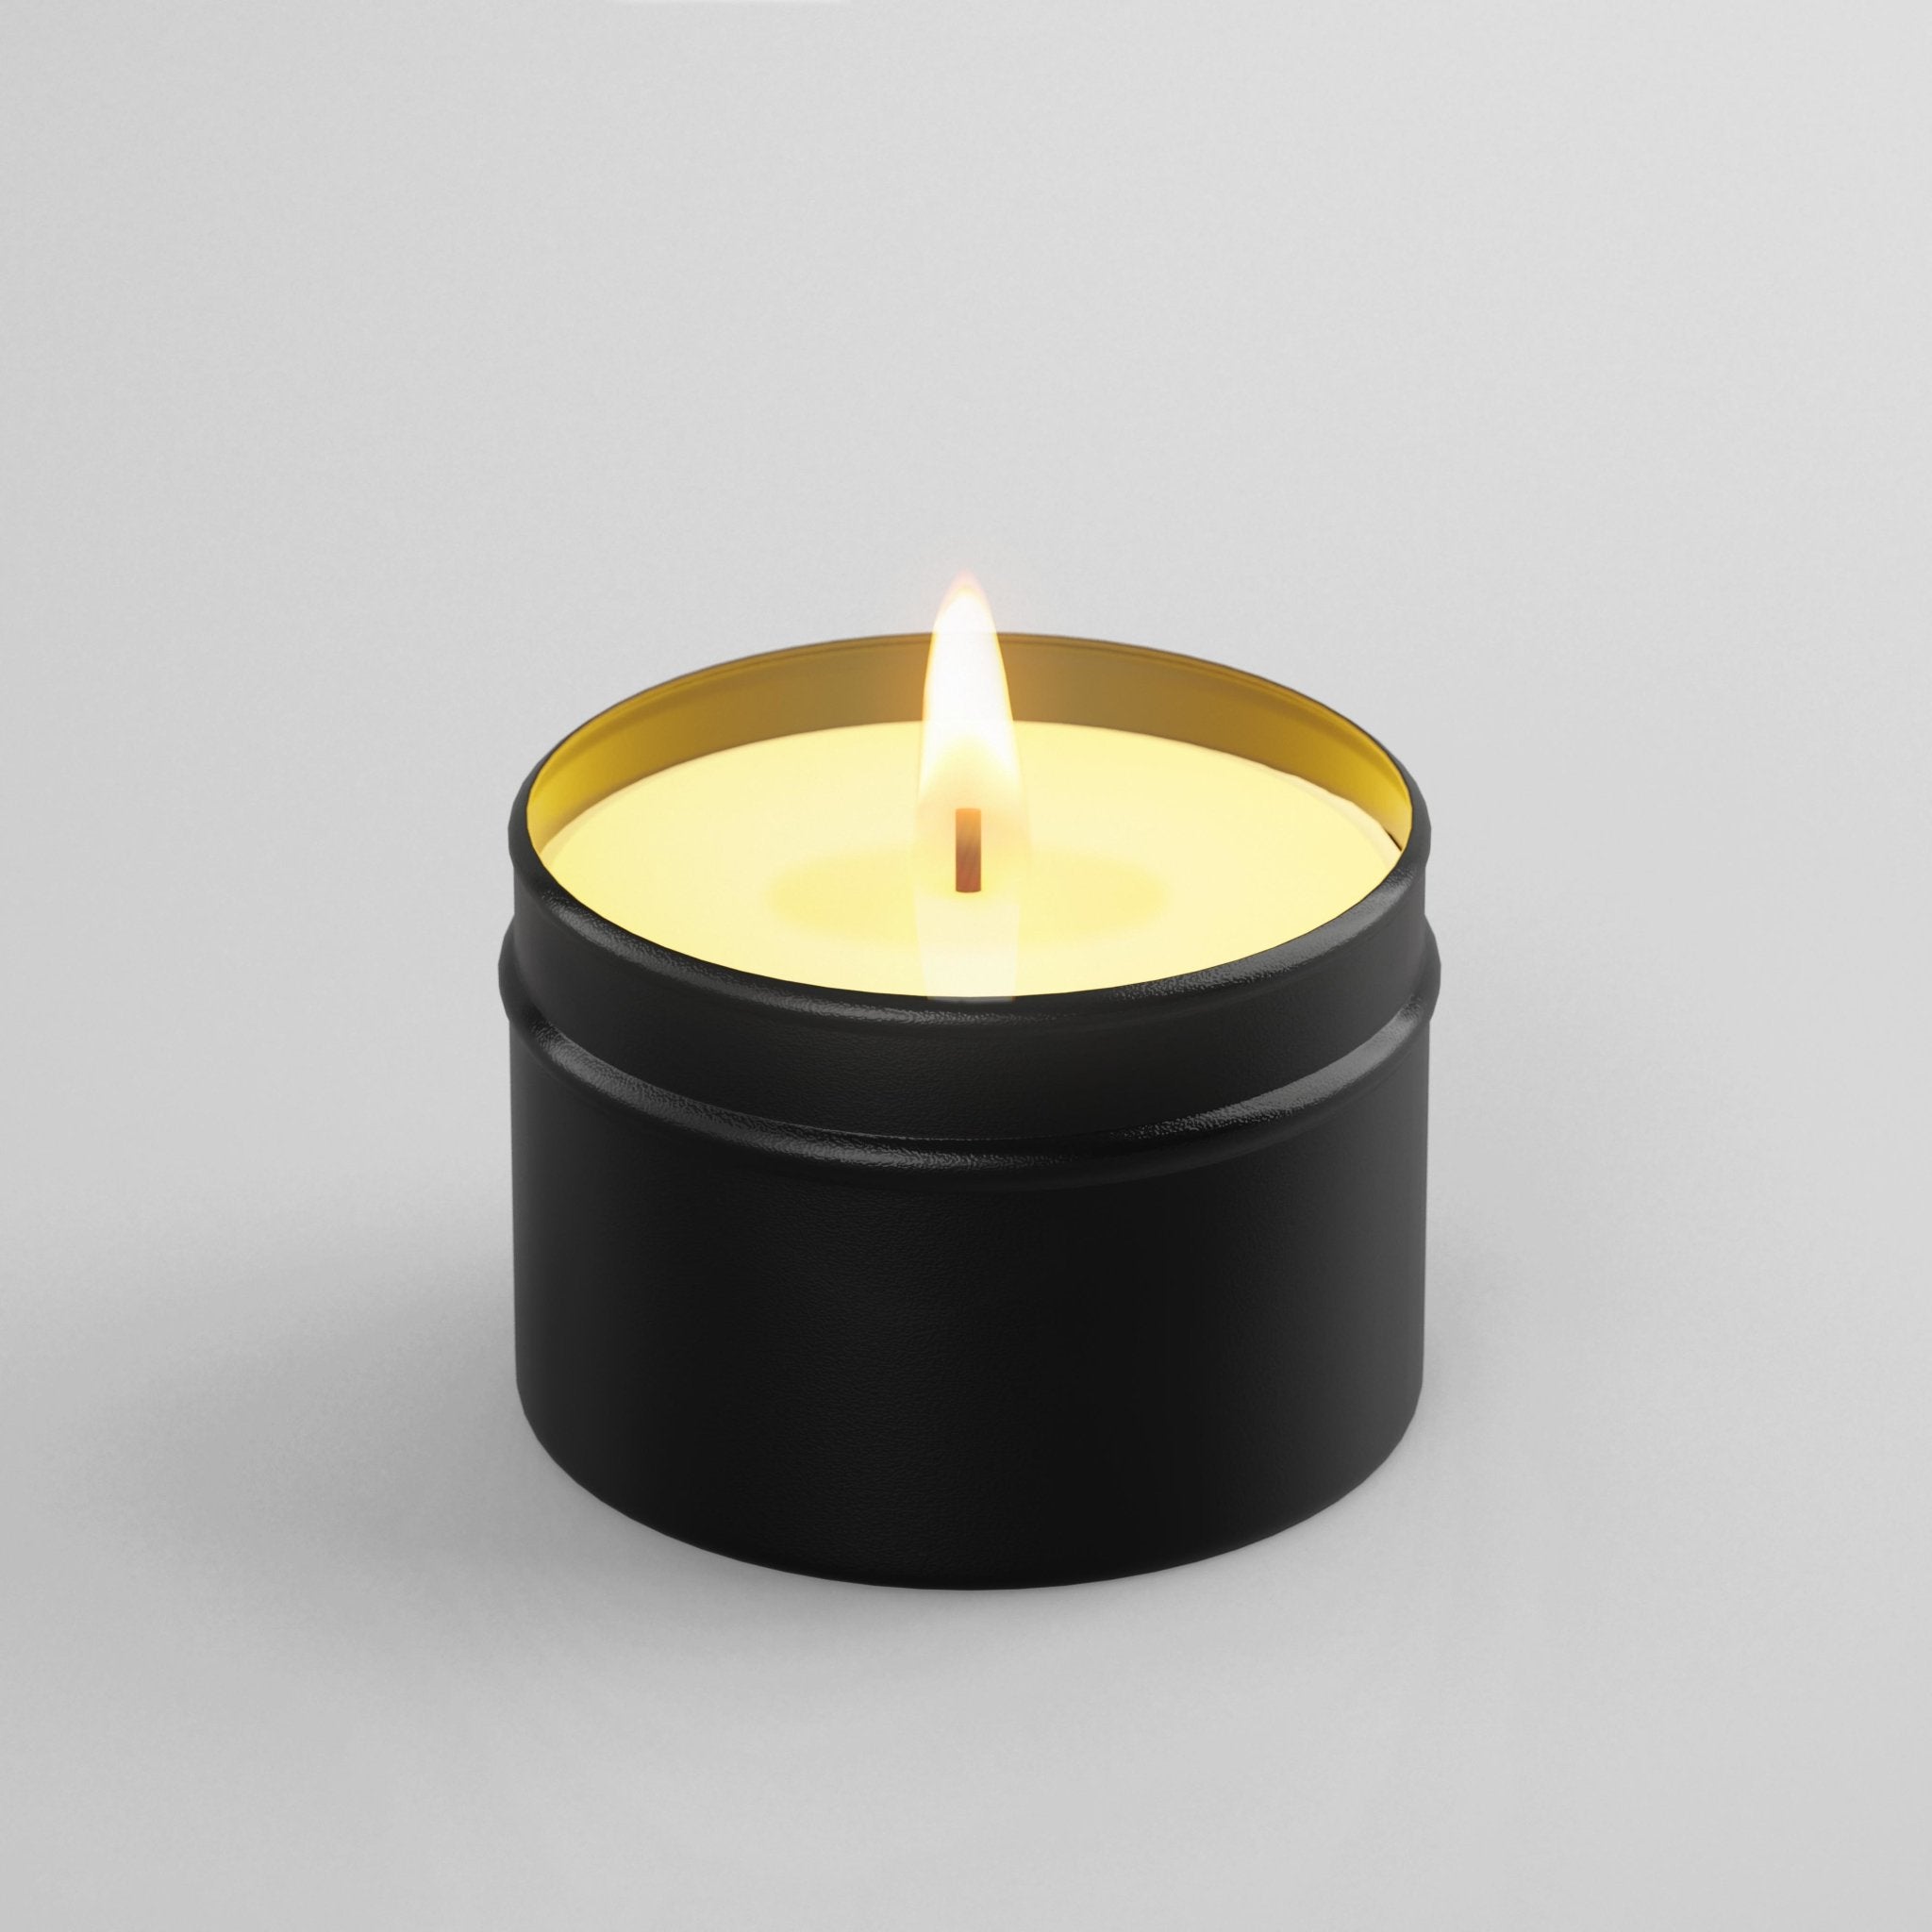 Black Currant Natural Wax Scented Candle in Black Travel Tin - Candlefy